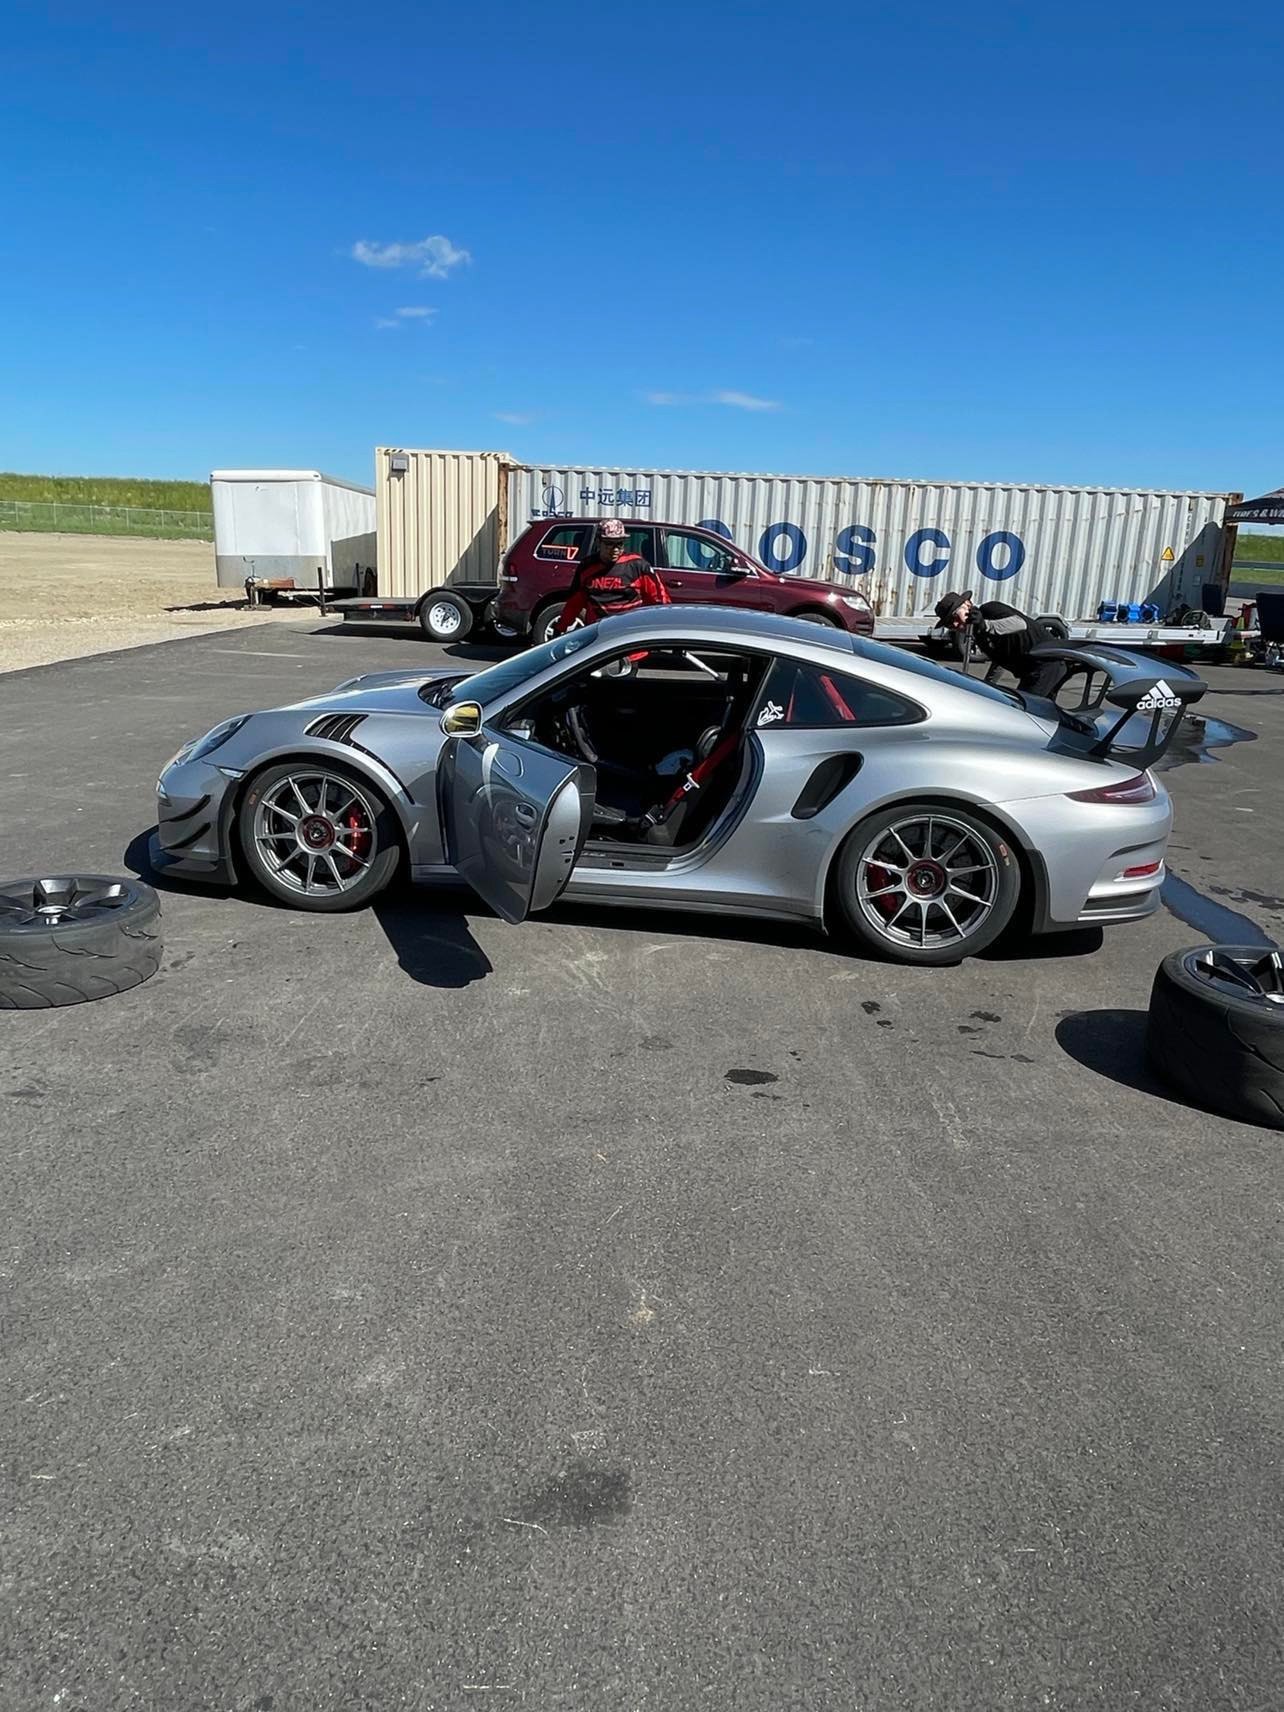 Porsche 991.1 GT3 RS at track with doors open